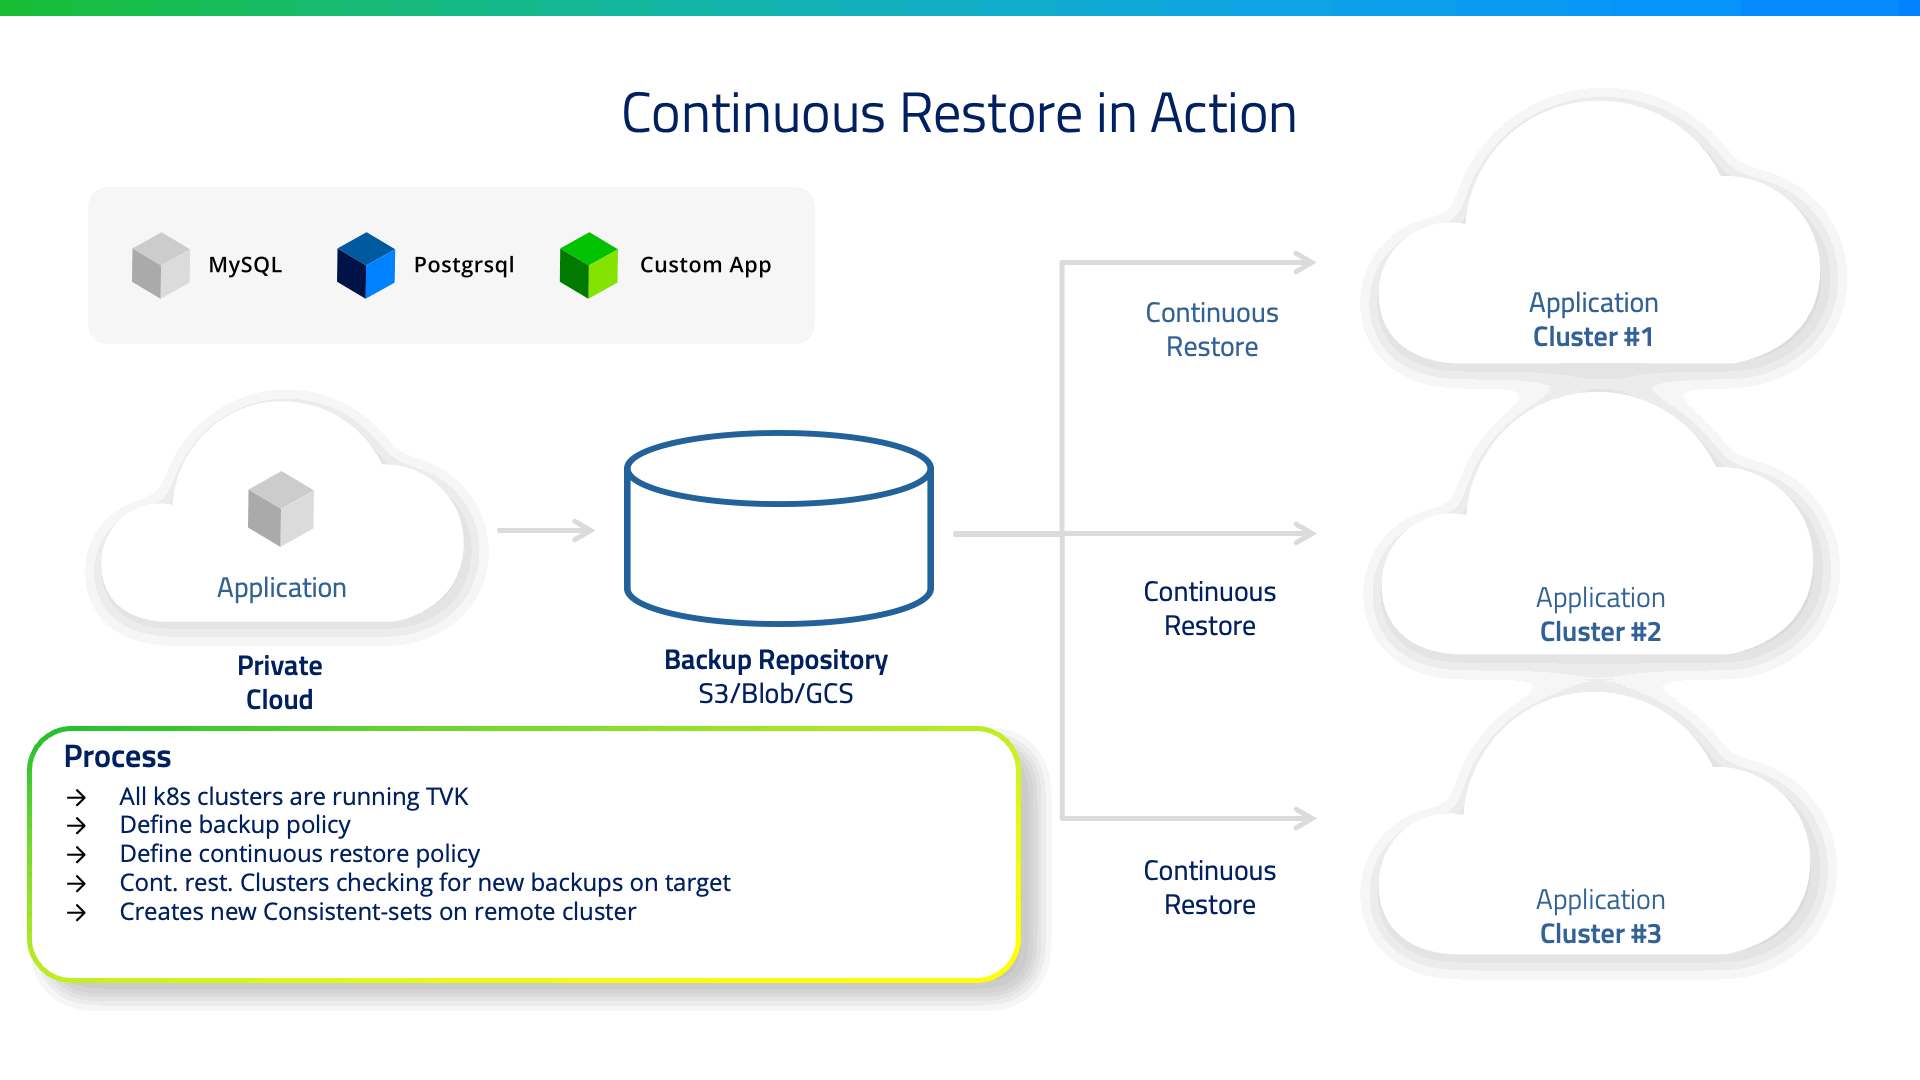 Image for continous restore in action. It includes elements like MySQL, Postgrsql, Custom App, Private Cloud, Backup Repository, Application clusters for continous restore